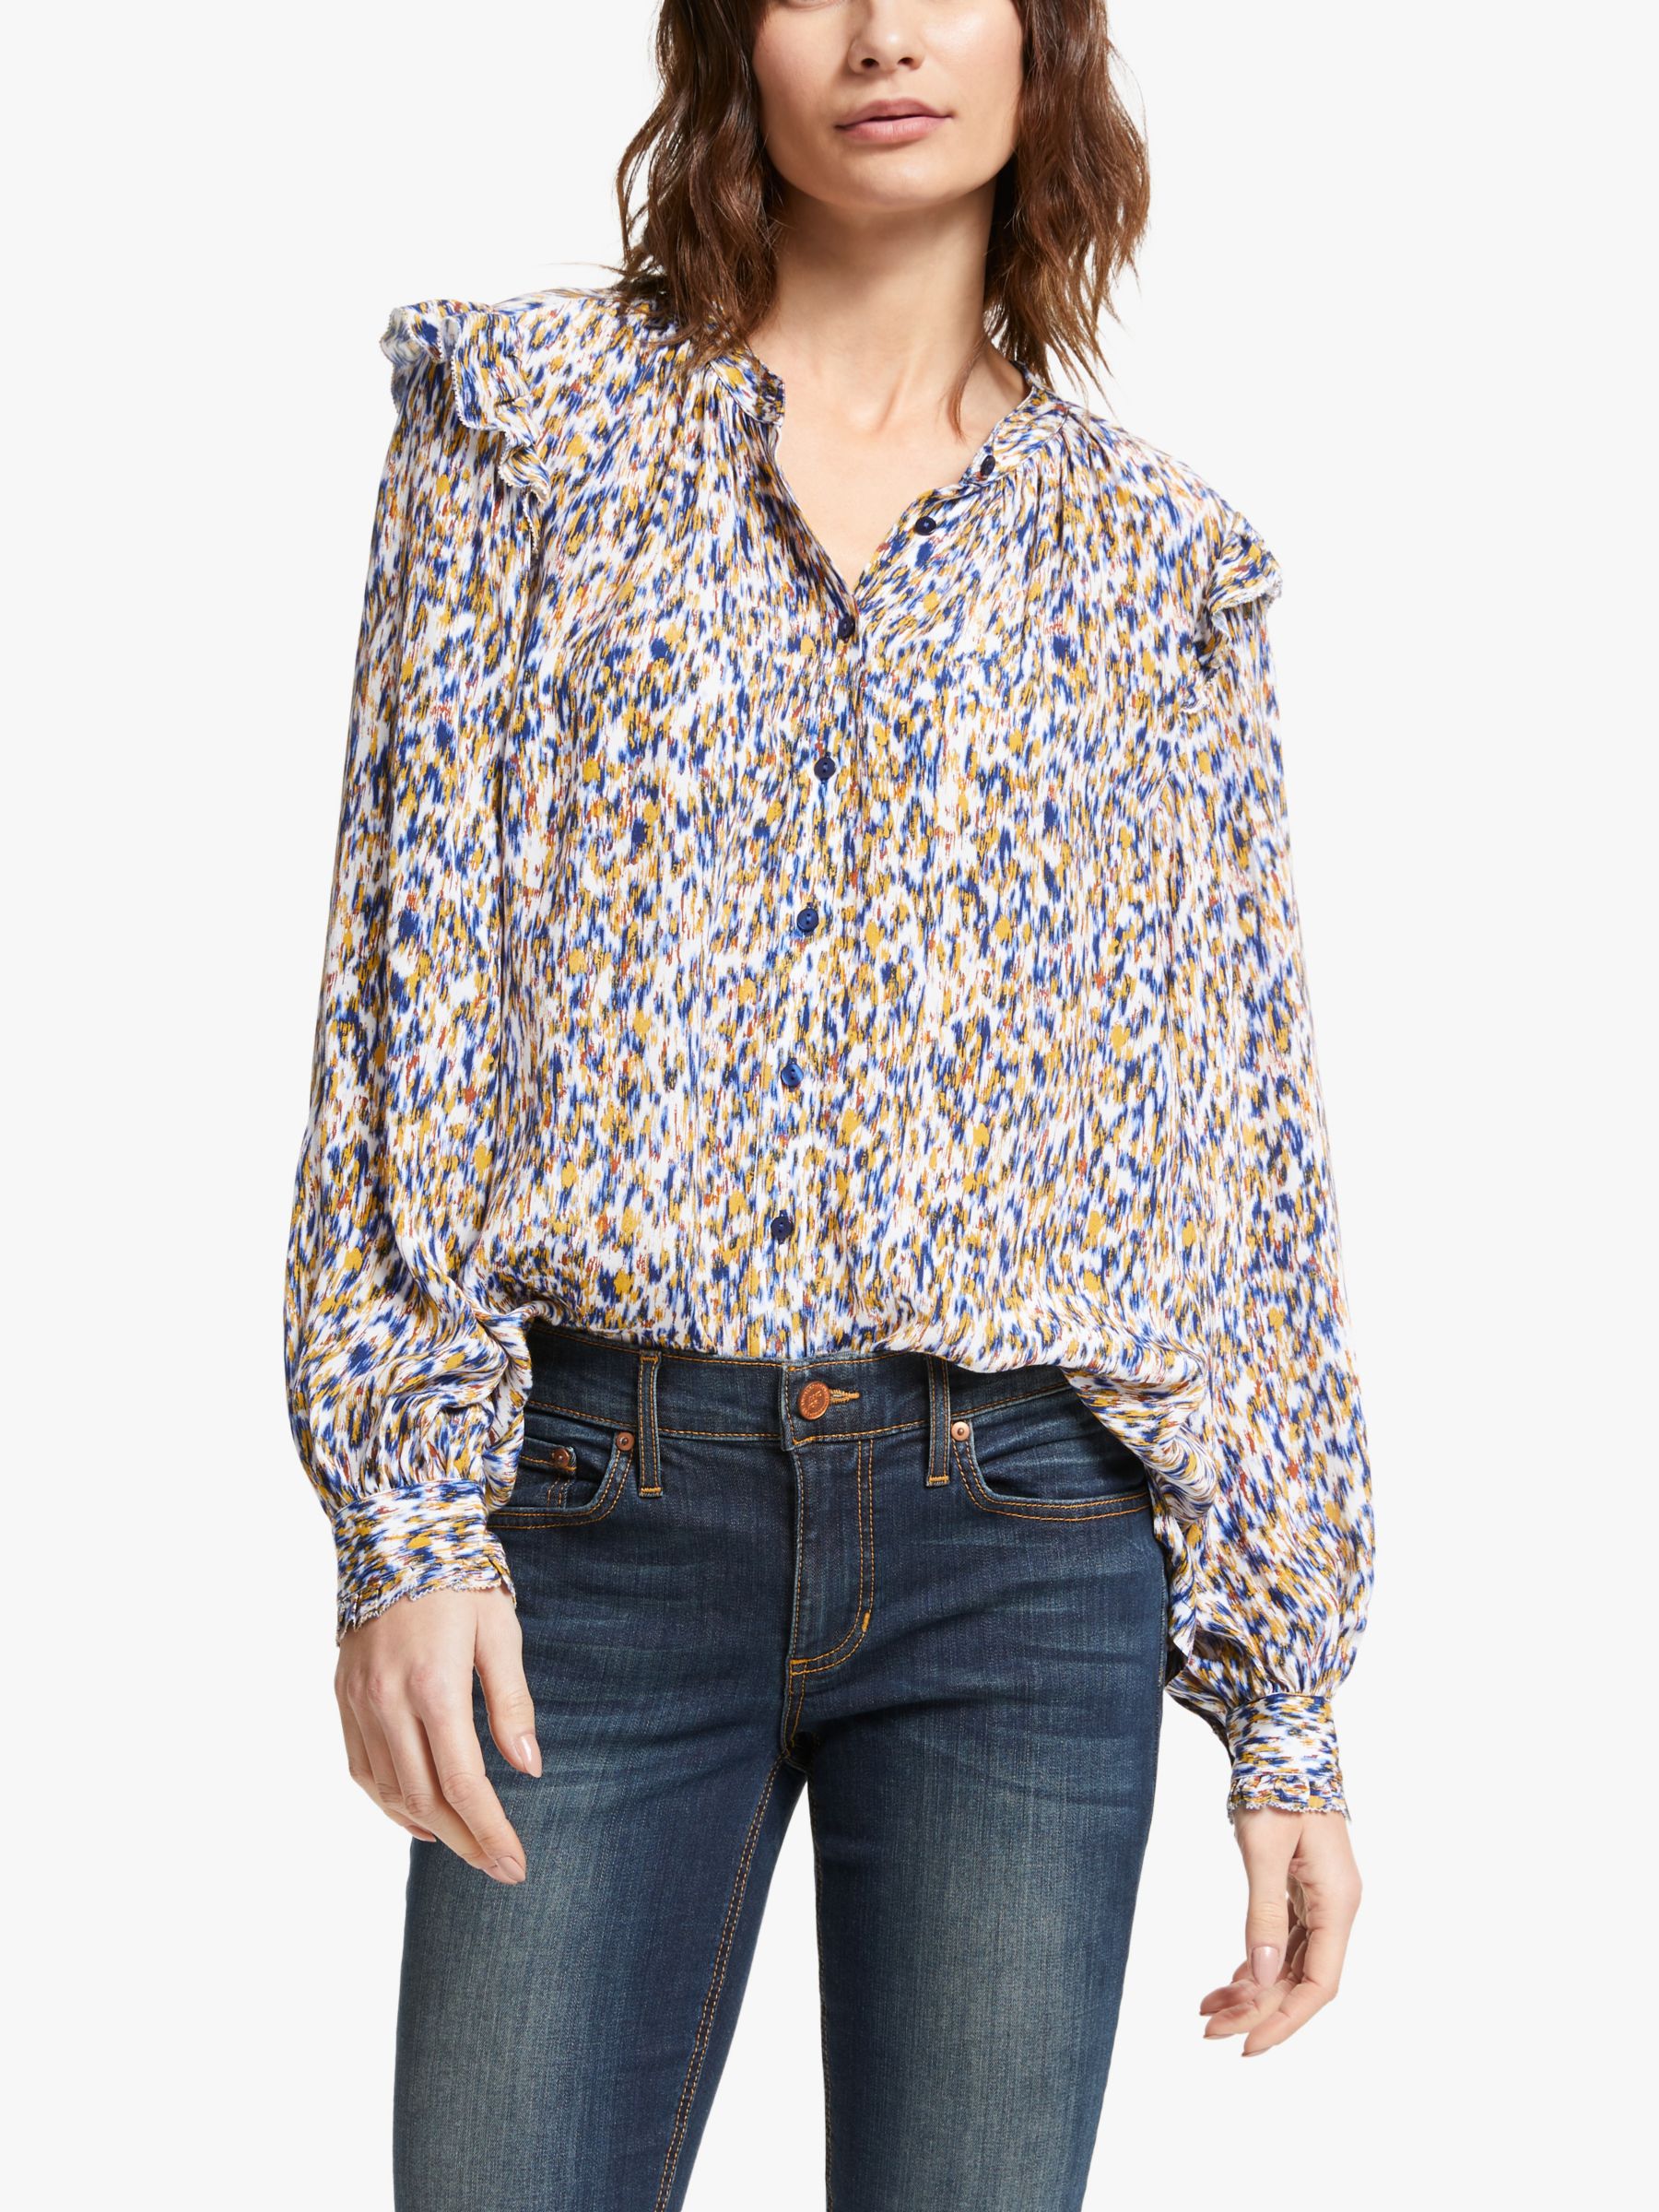 AND/OR Arlo Ikat Blouse, Multi